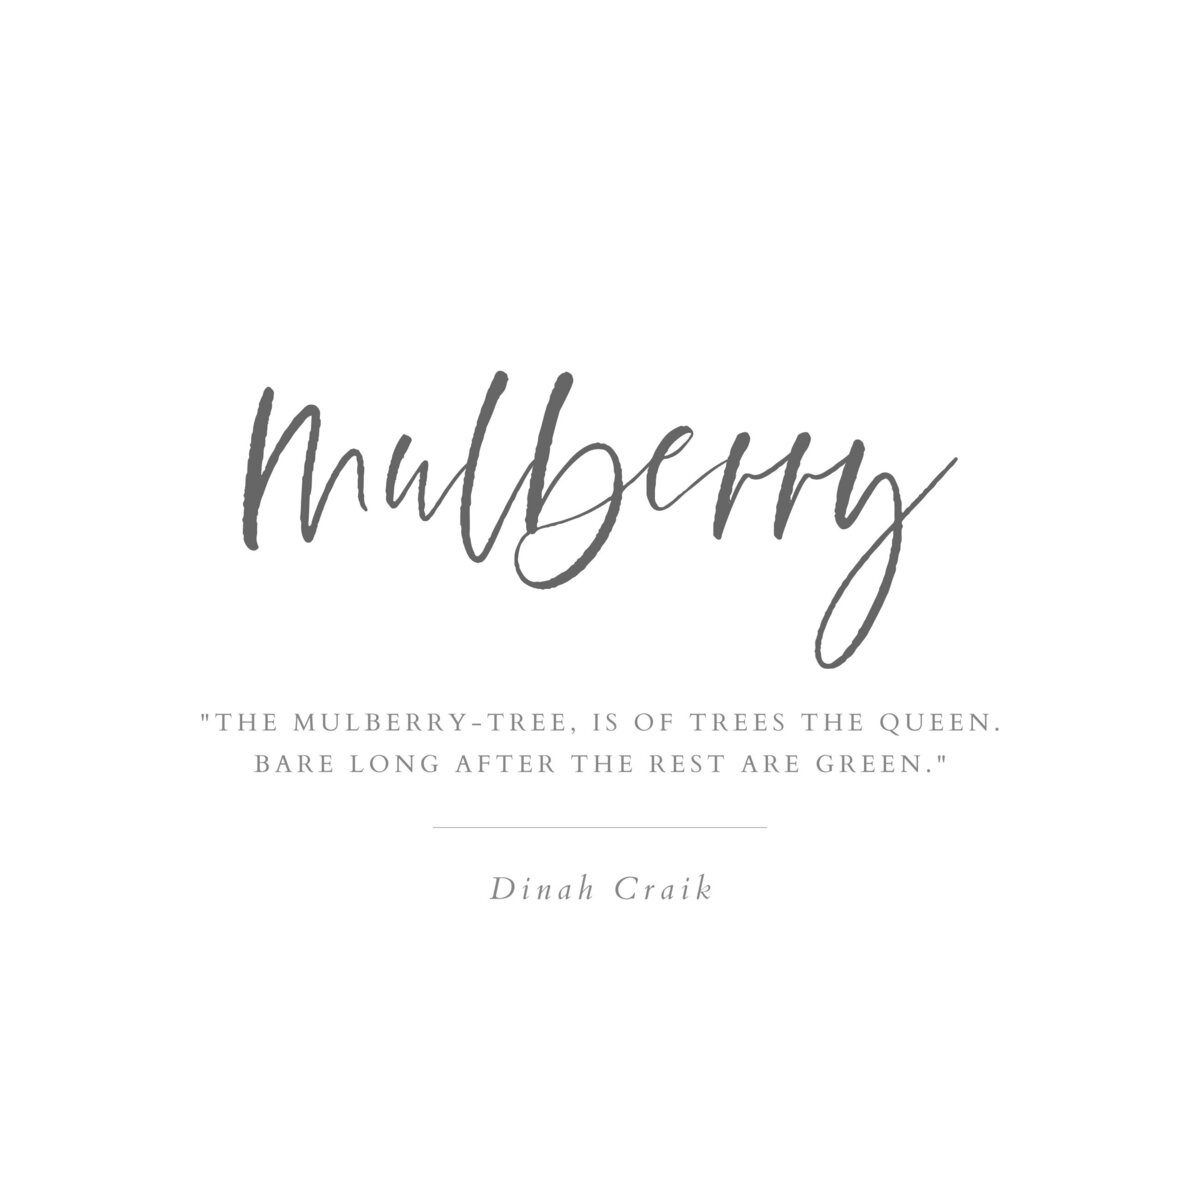 Mulberry_Title Page